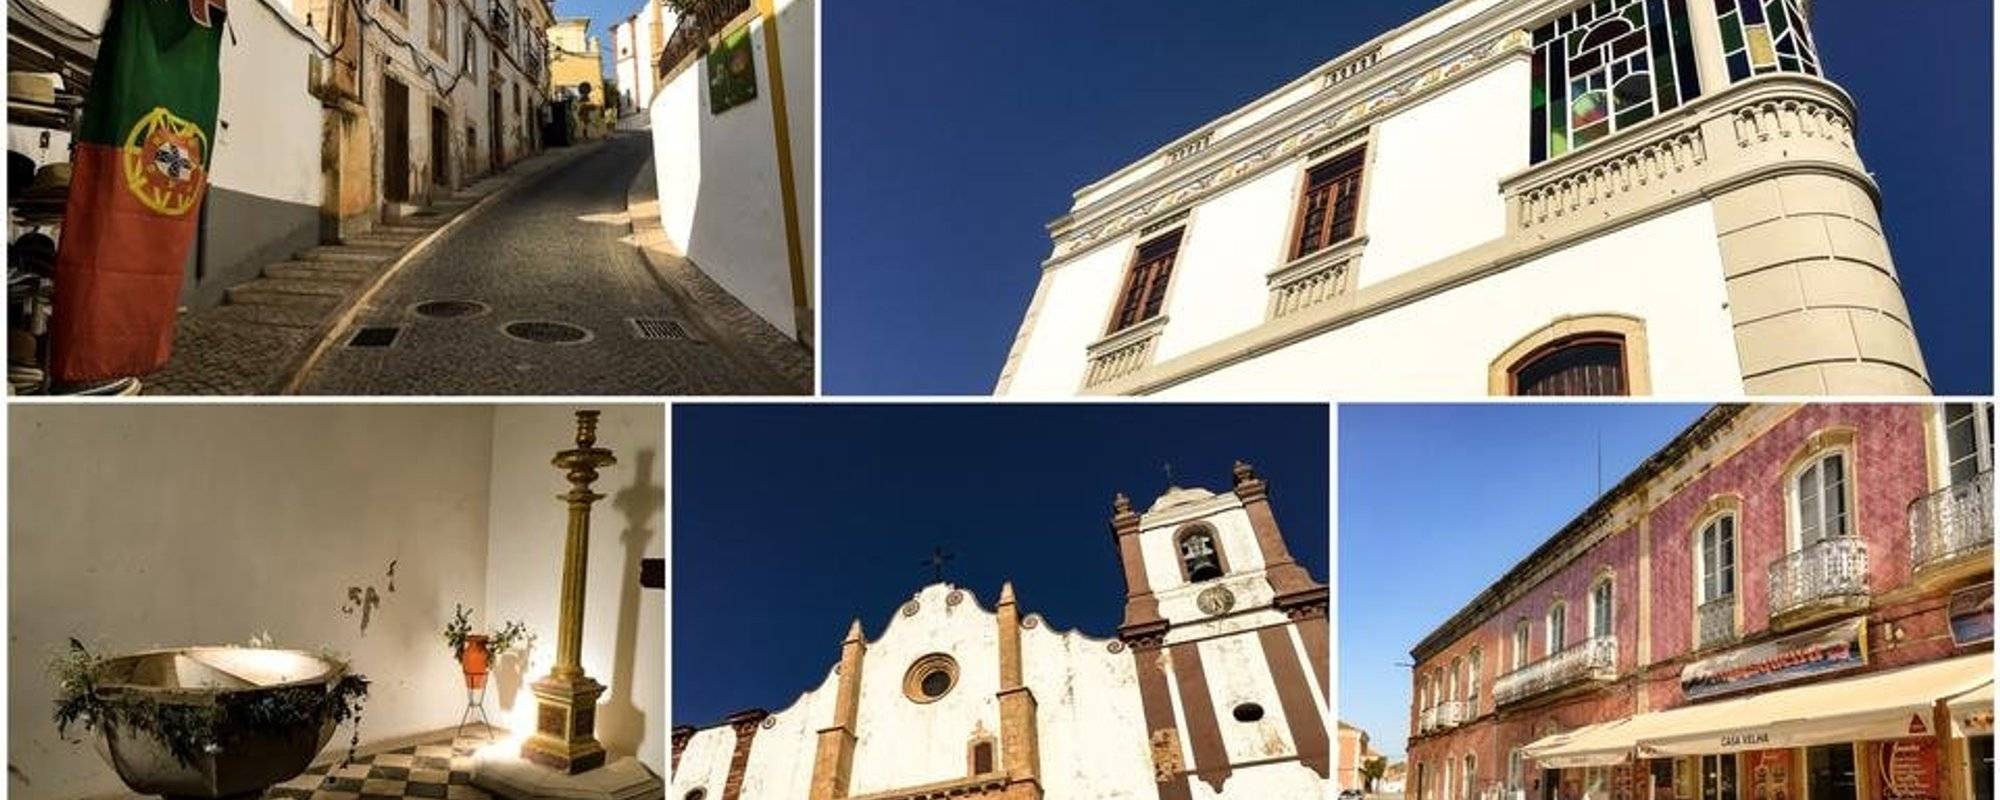 Shaka's Travel Book - Visiting Silves, the Former Capital of the Algarve (Part 1)